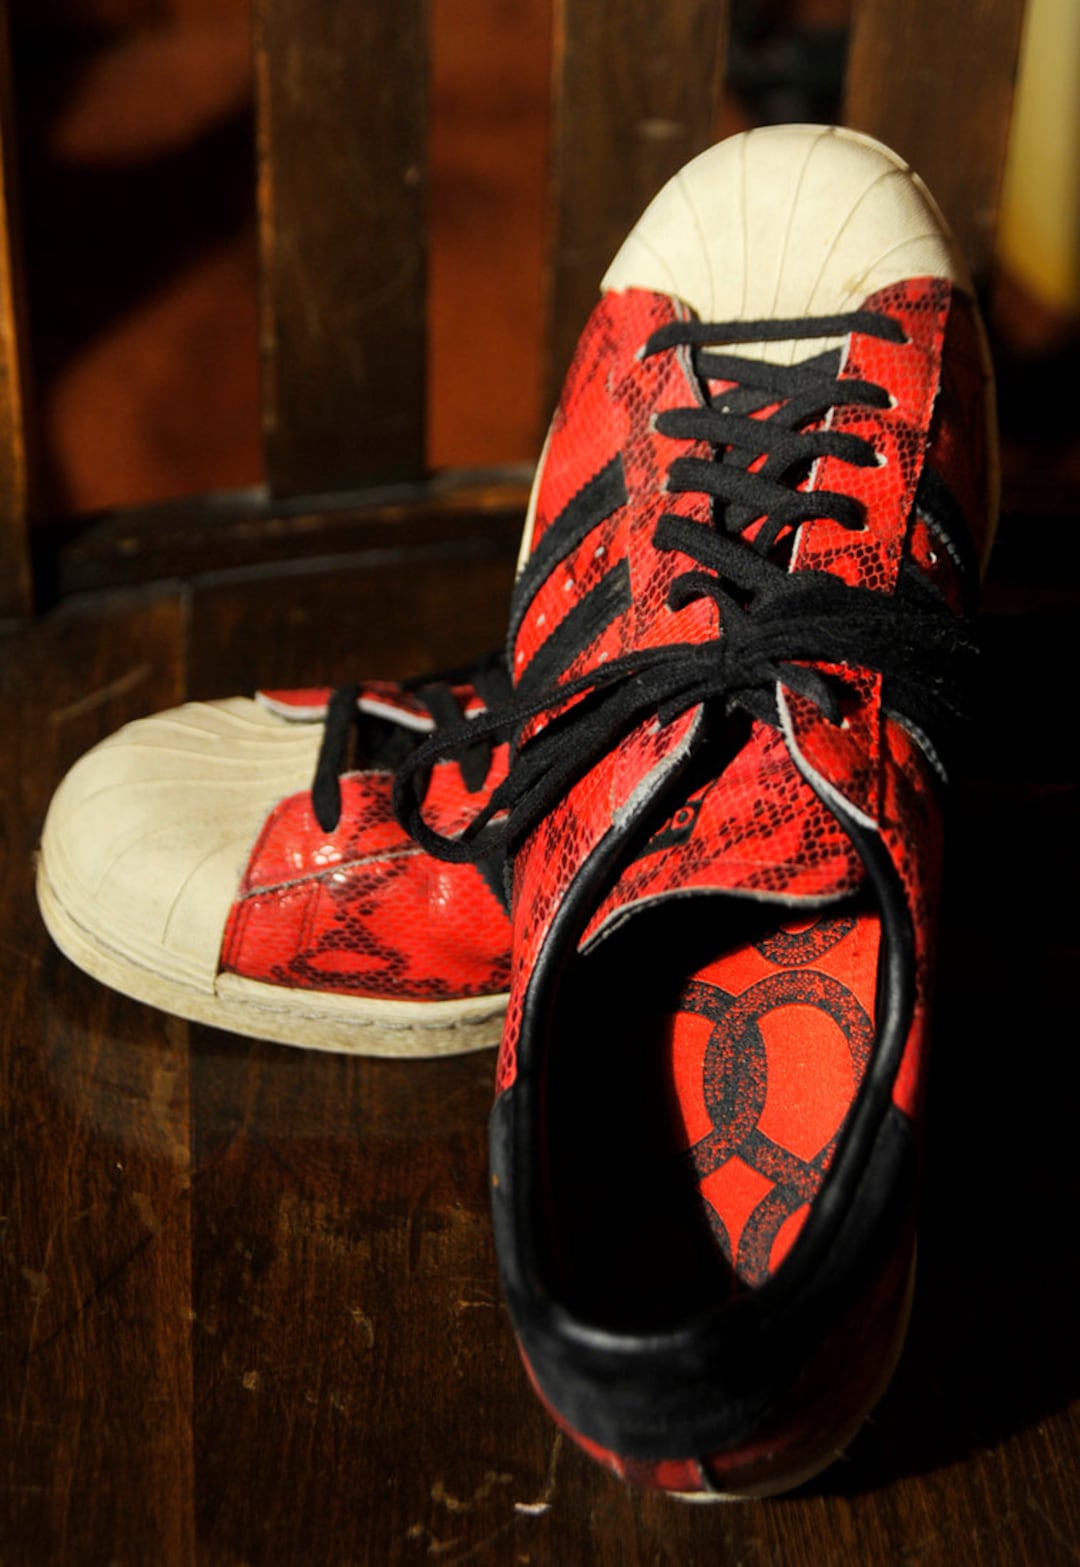 Locura retorta lavabo Rare and Classic Adidas Superstar Red Leather Snakeskin Year - Etsy